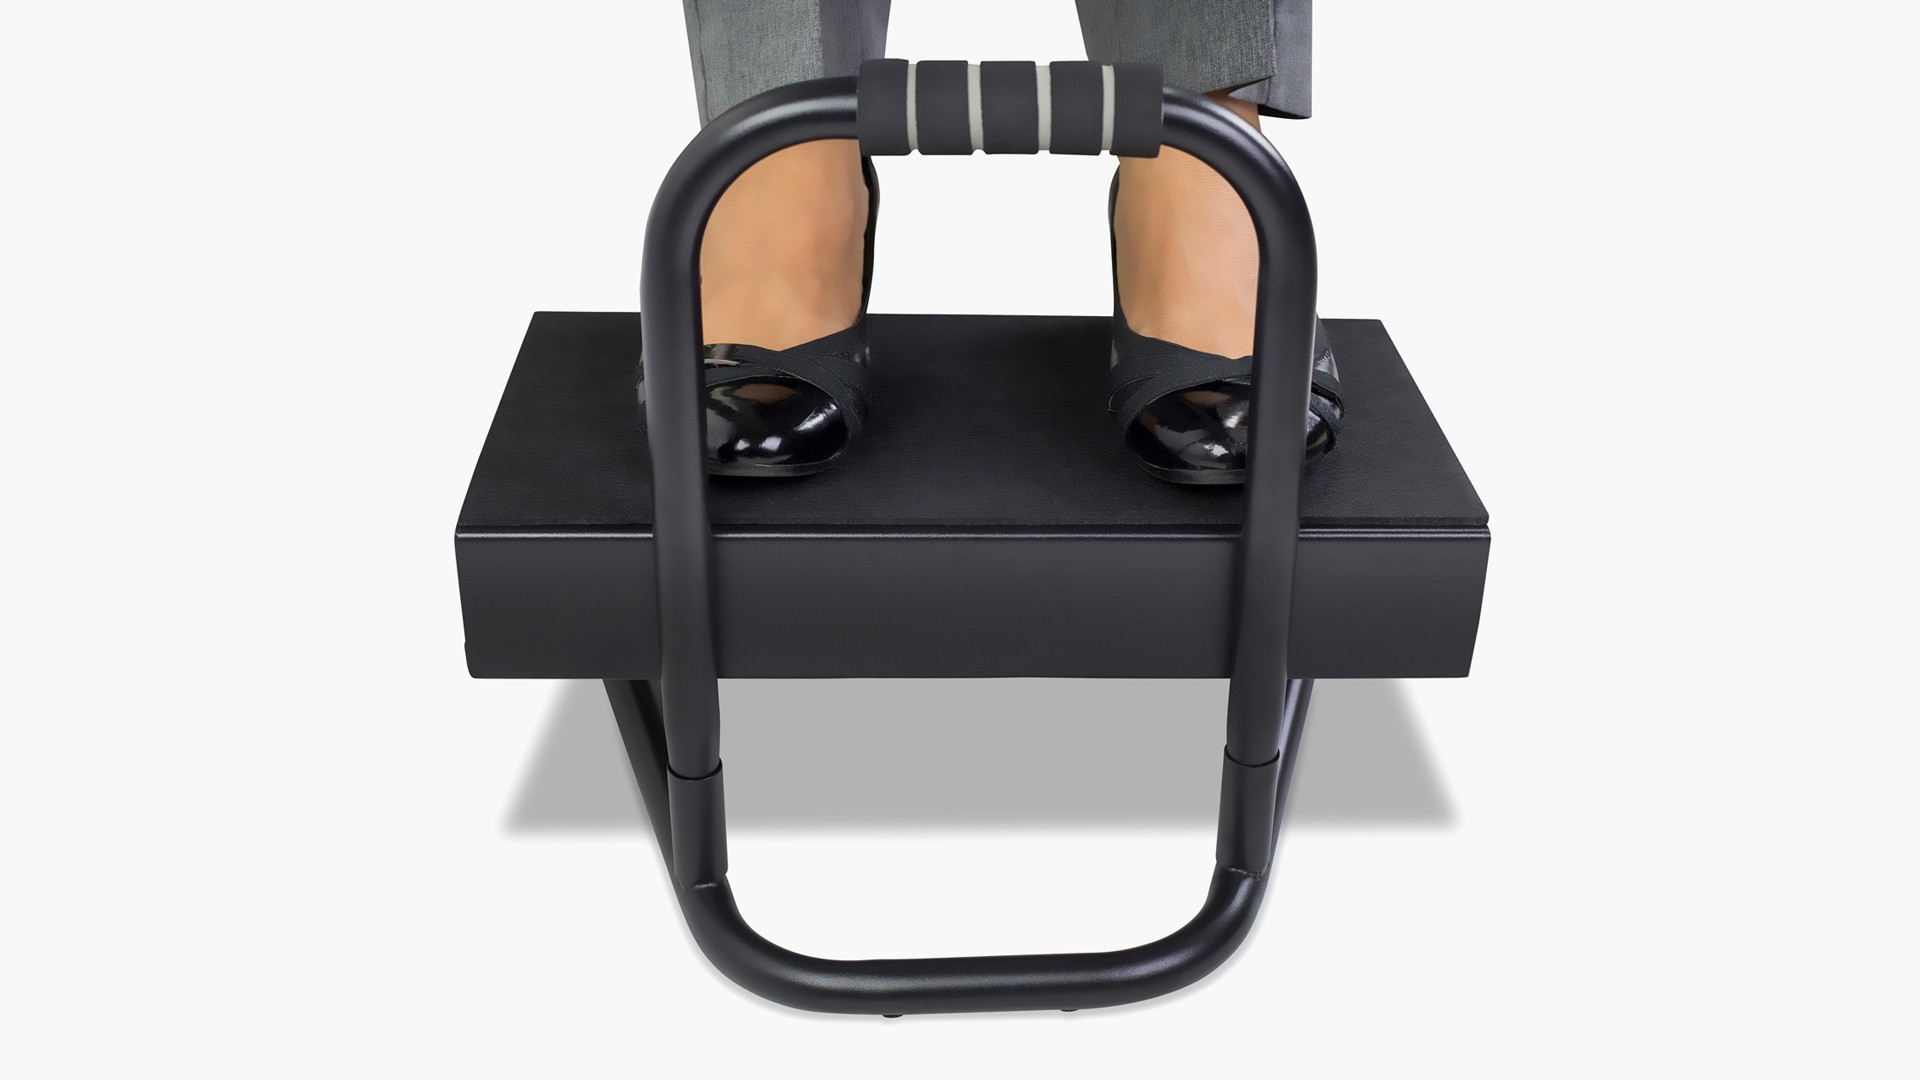 Mount-It! Ergonomic Footrest for Office or Home